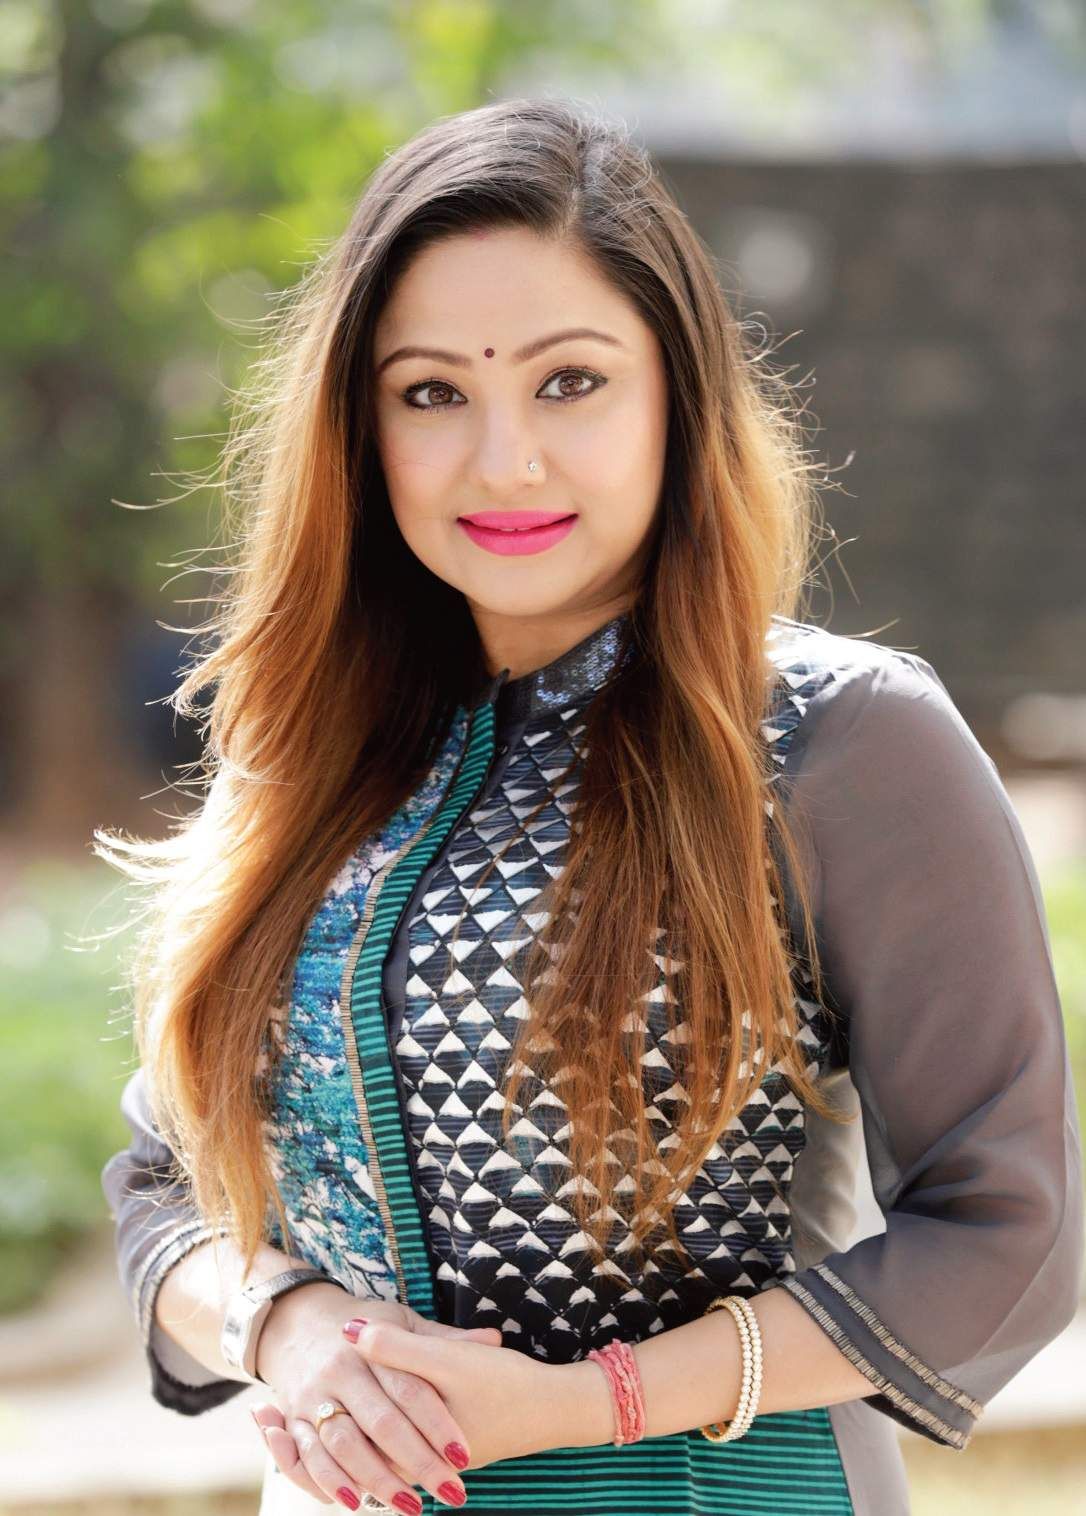 Priyanka Upendra’s Mummy To Be Dubbed In Tamil